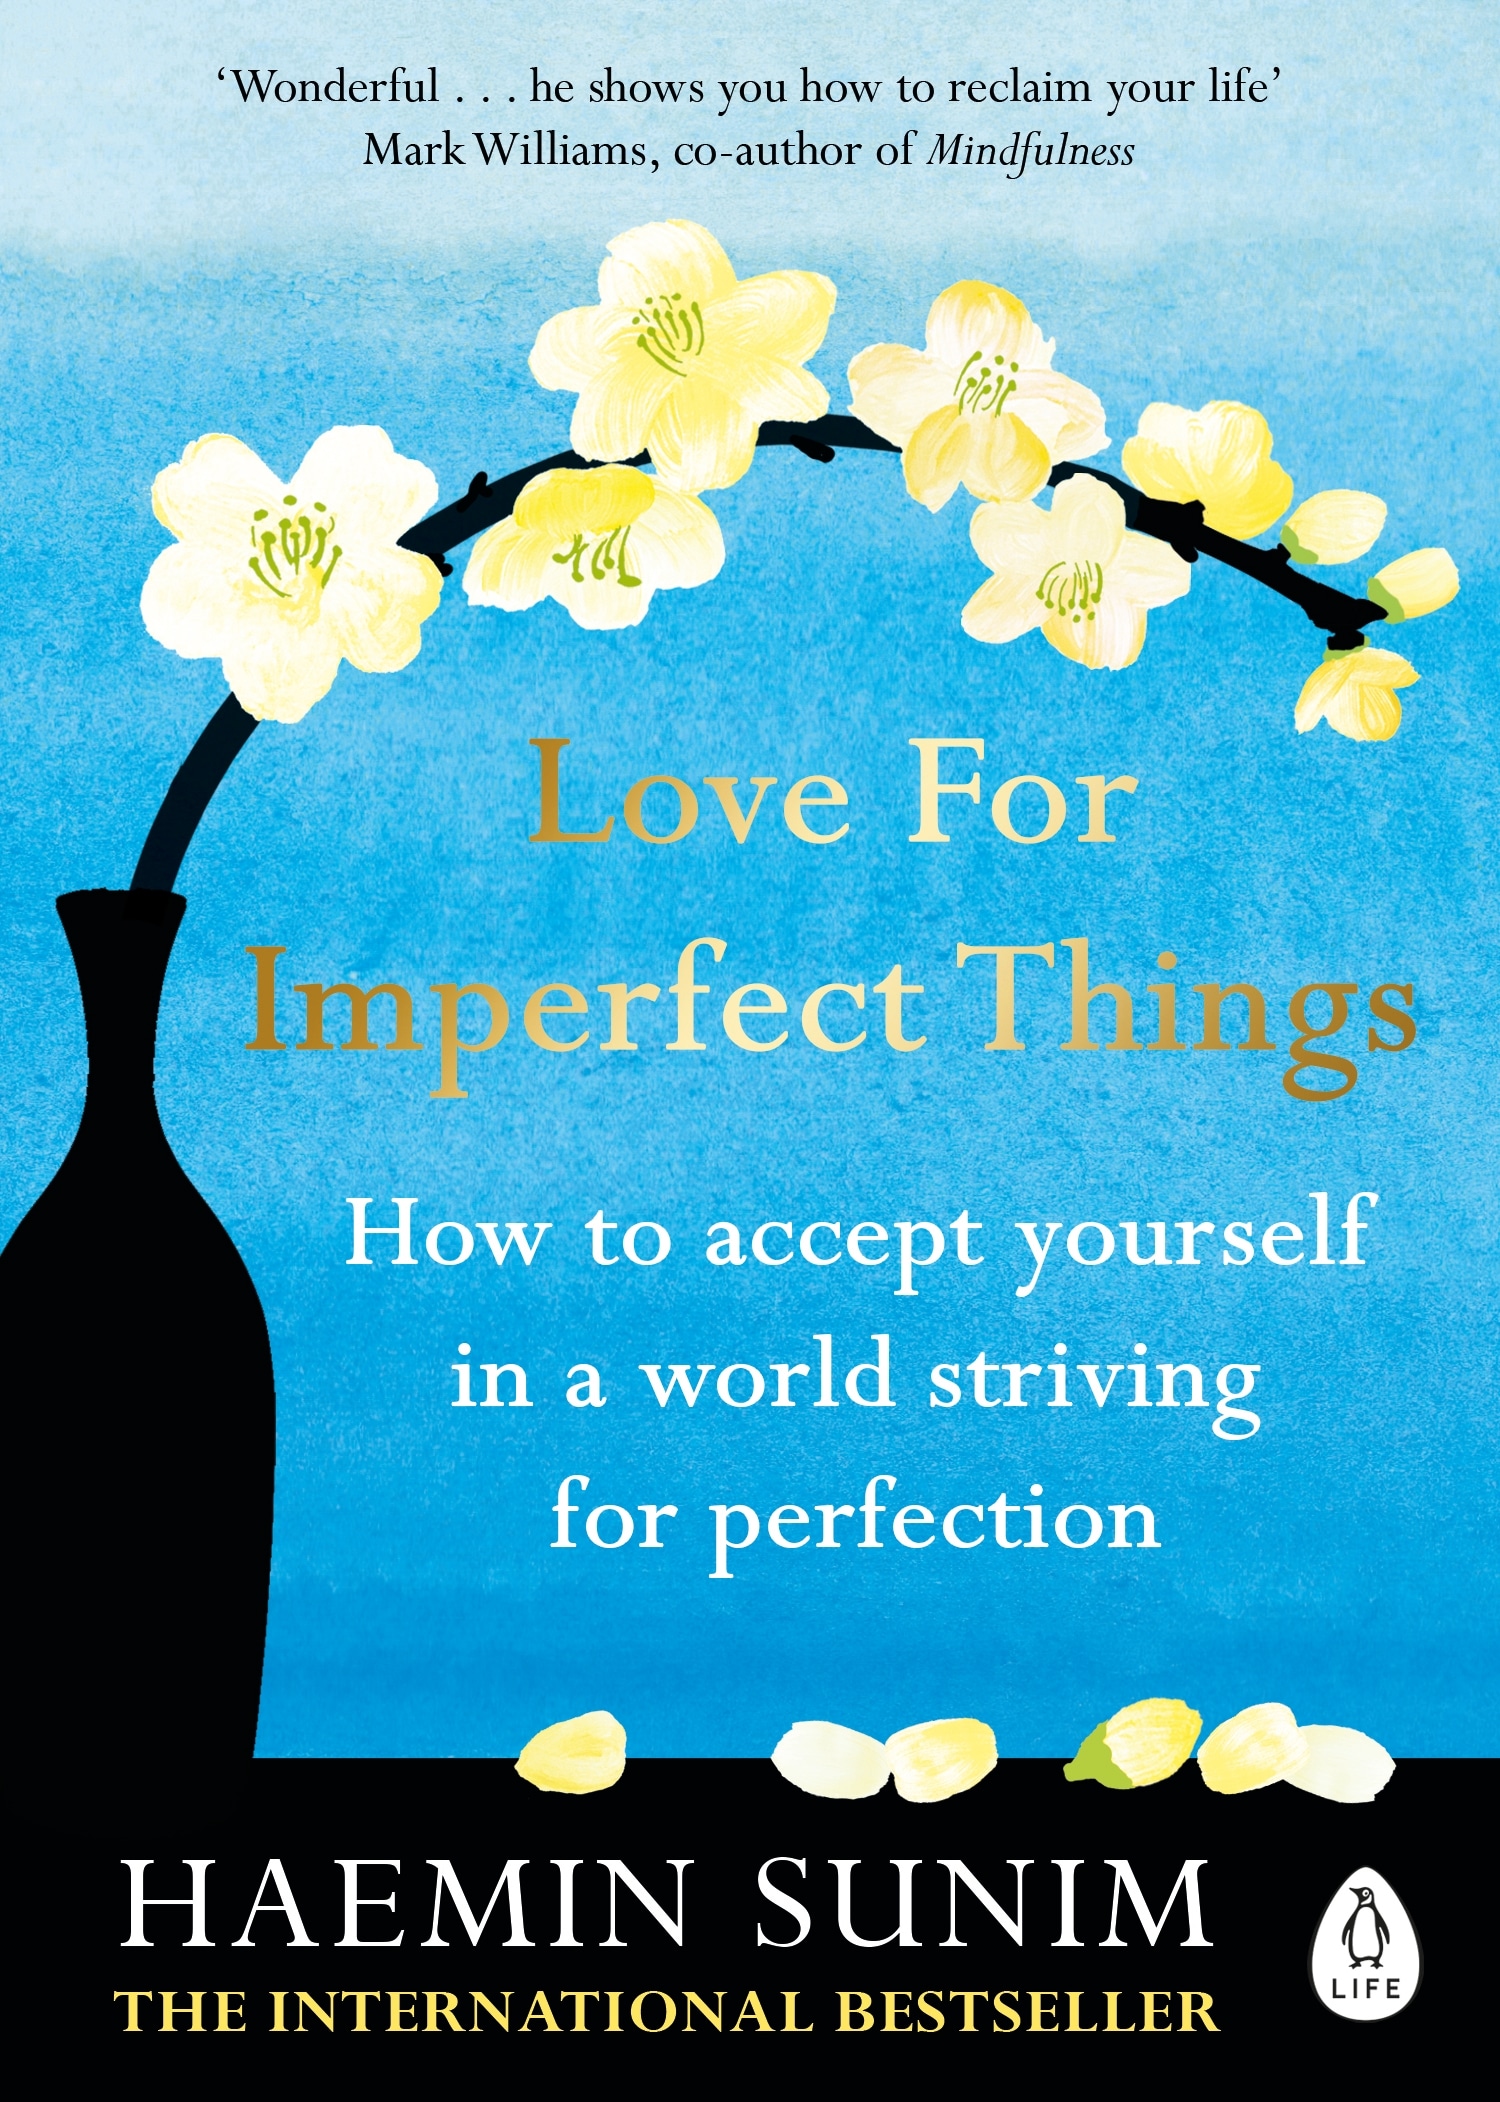 Book “Love for Imperfect Things” by Haemin Sunim